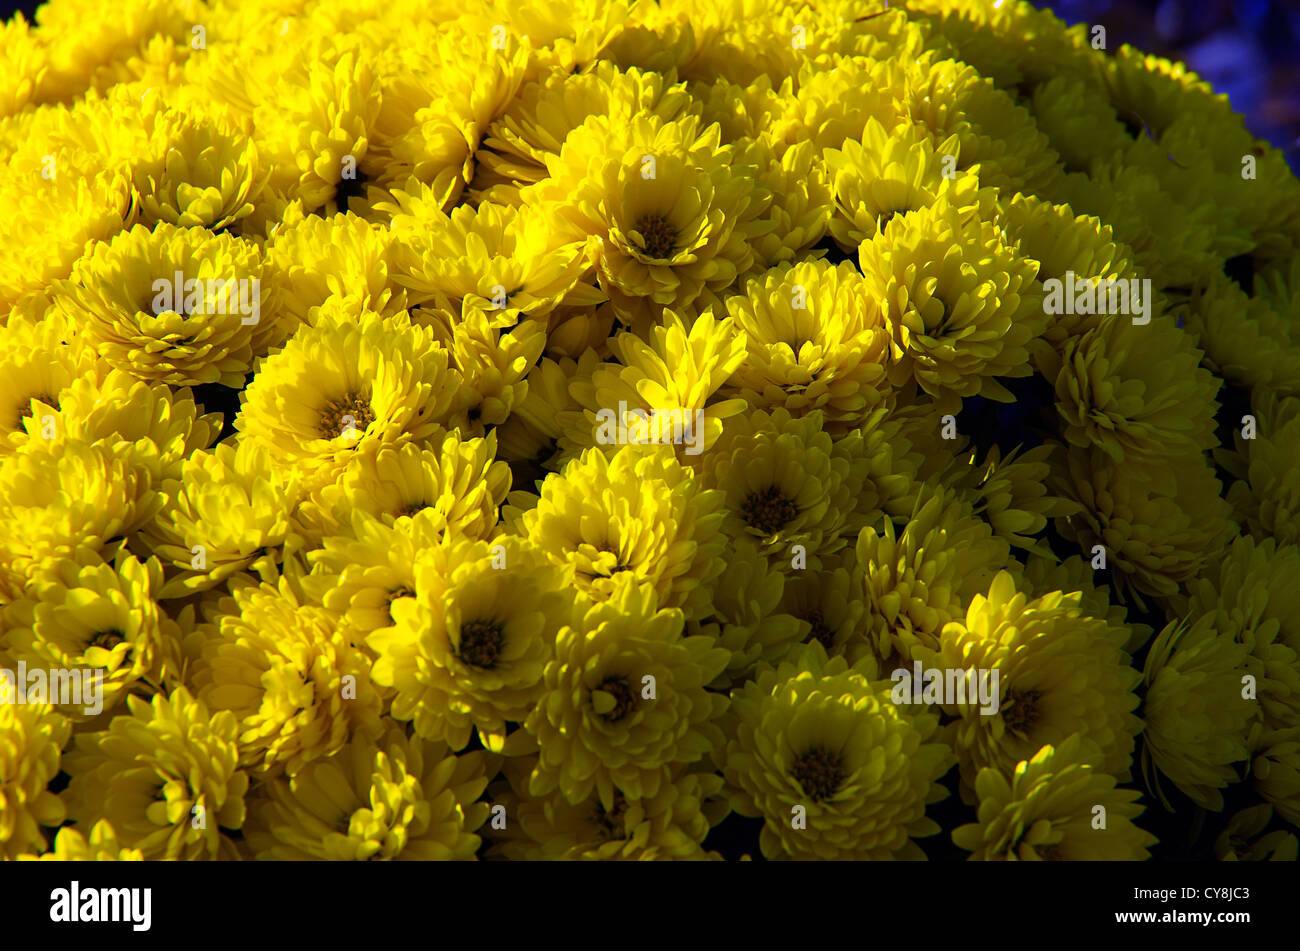 A bouquet of yellow flowers Stock Photo